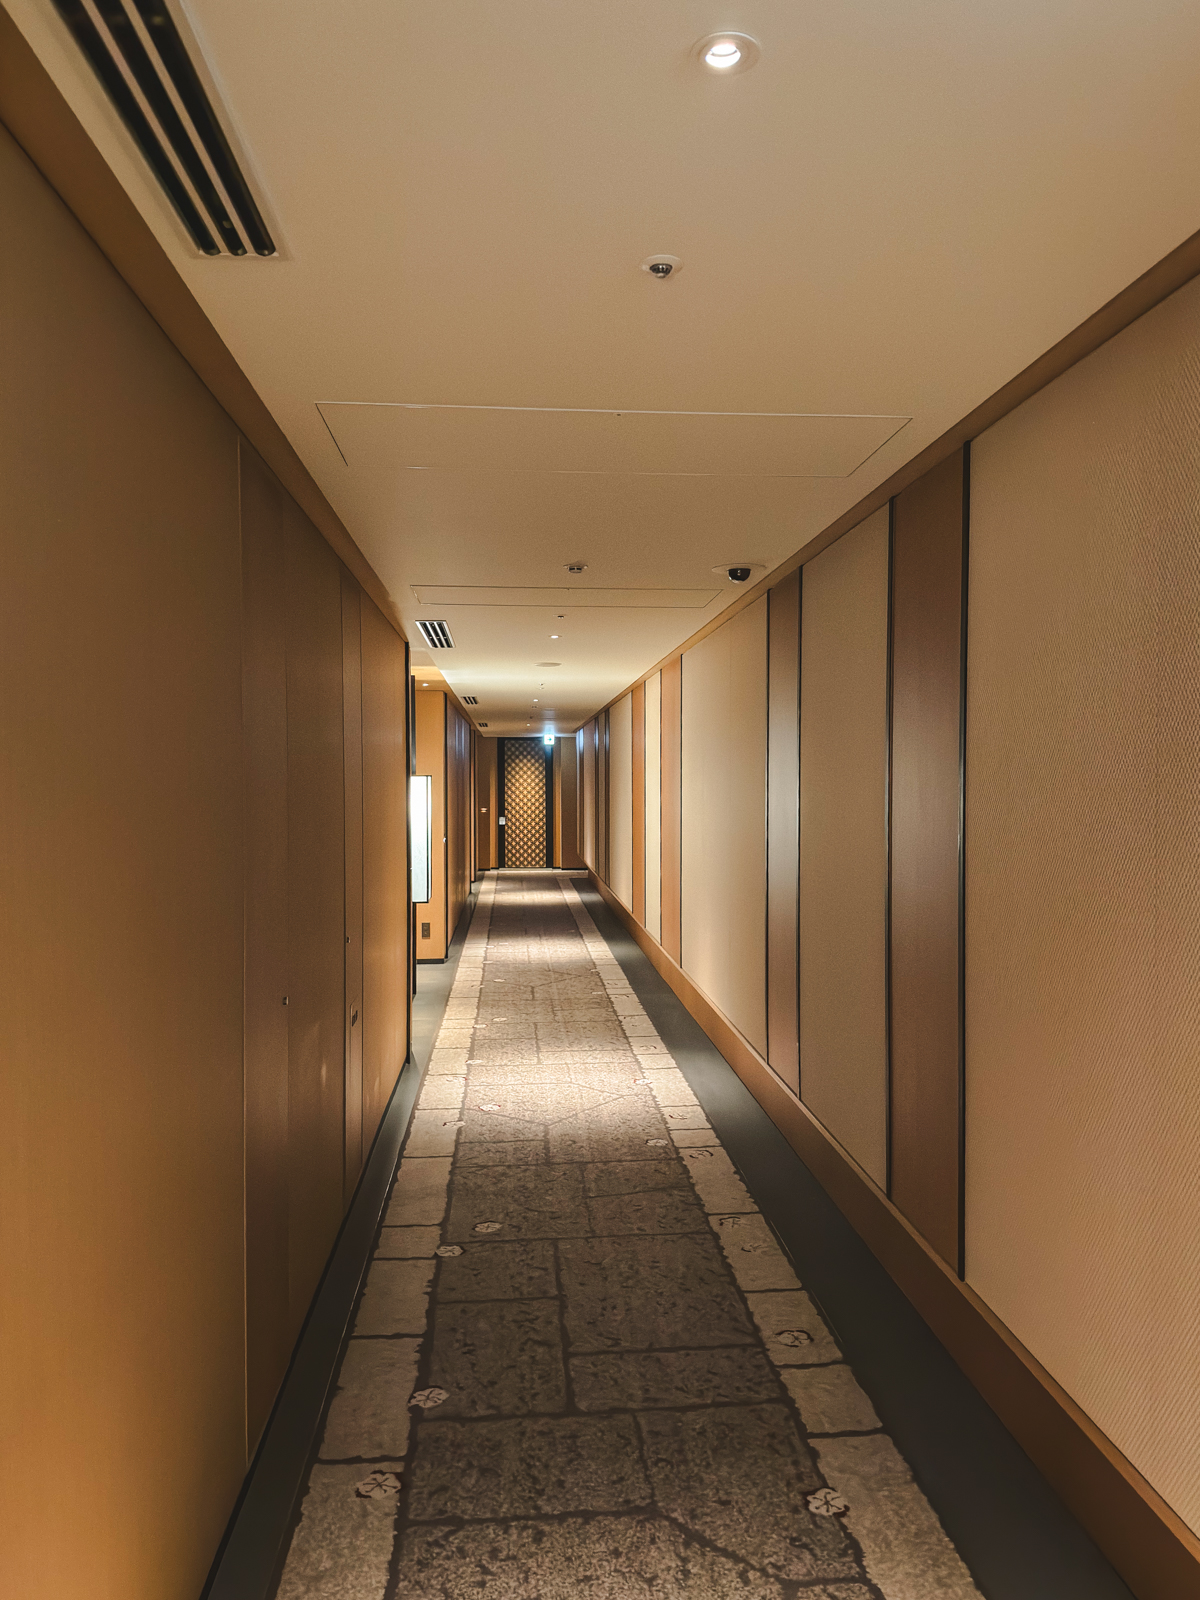 Long hotel hallway with beige walls and some light fixtures on the side.